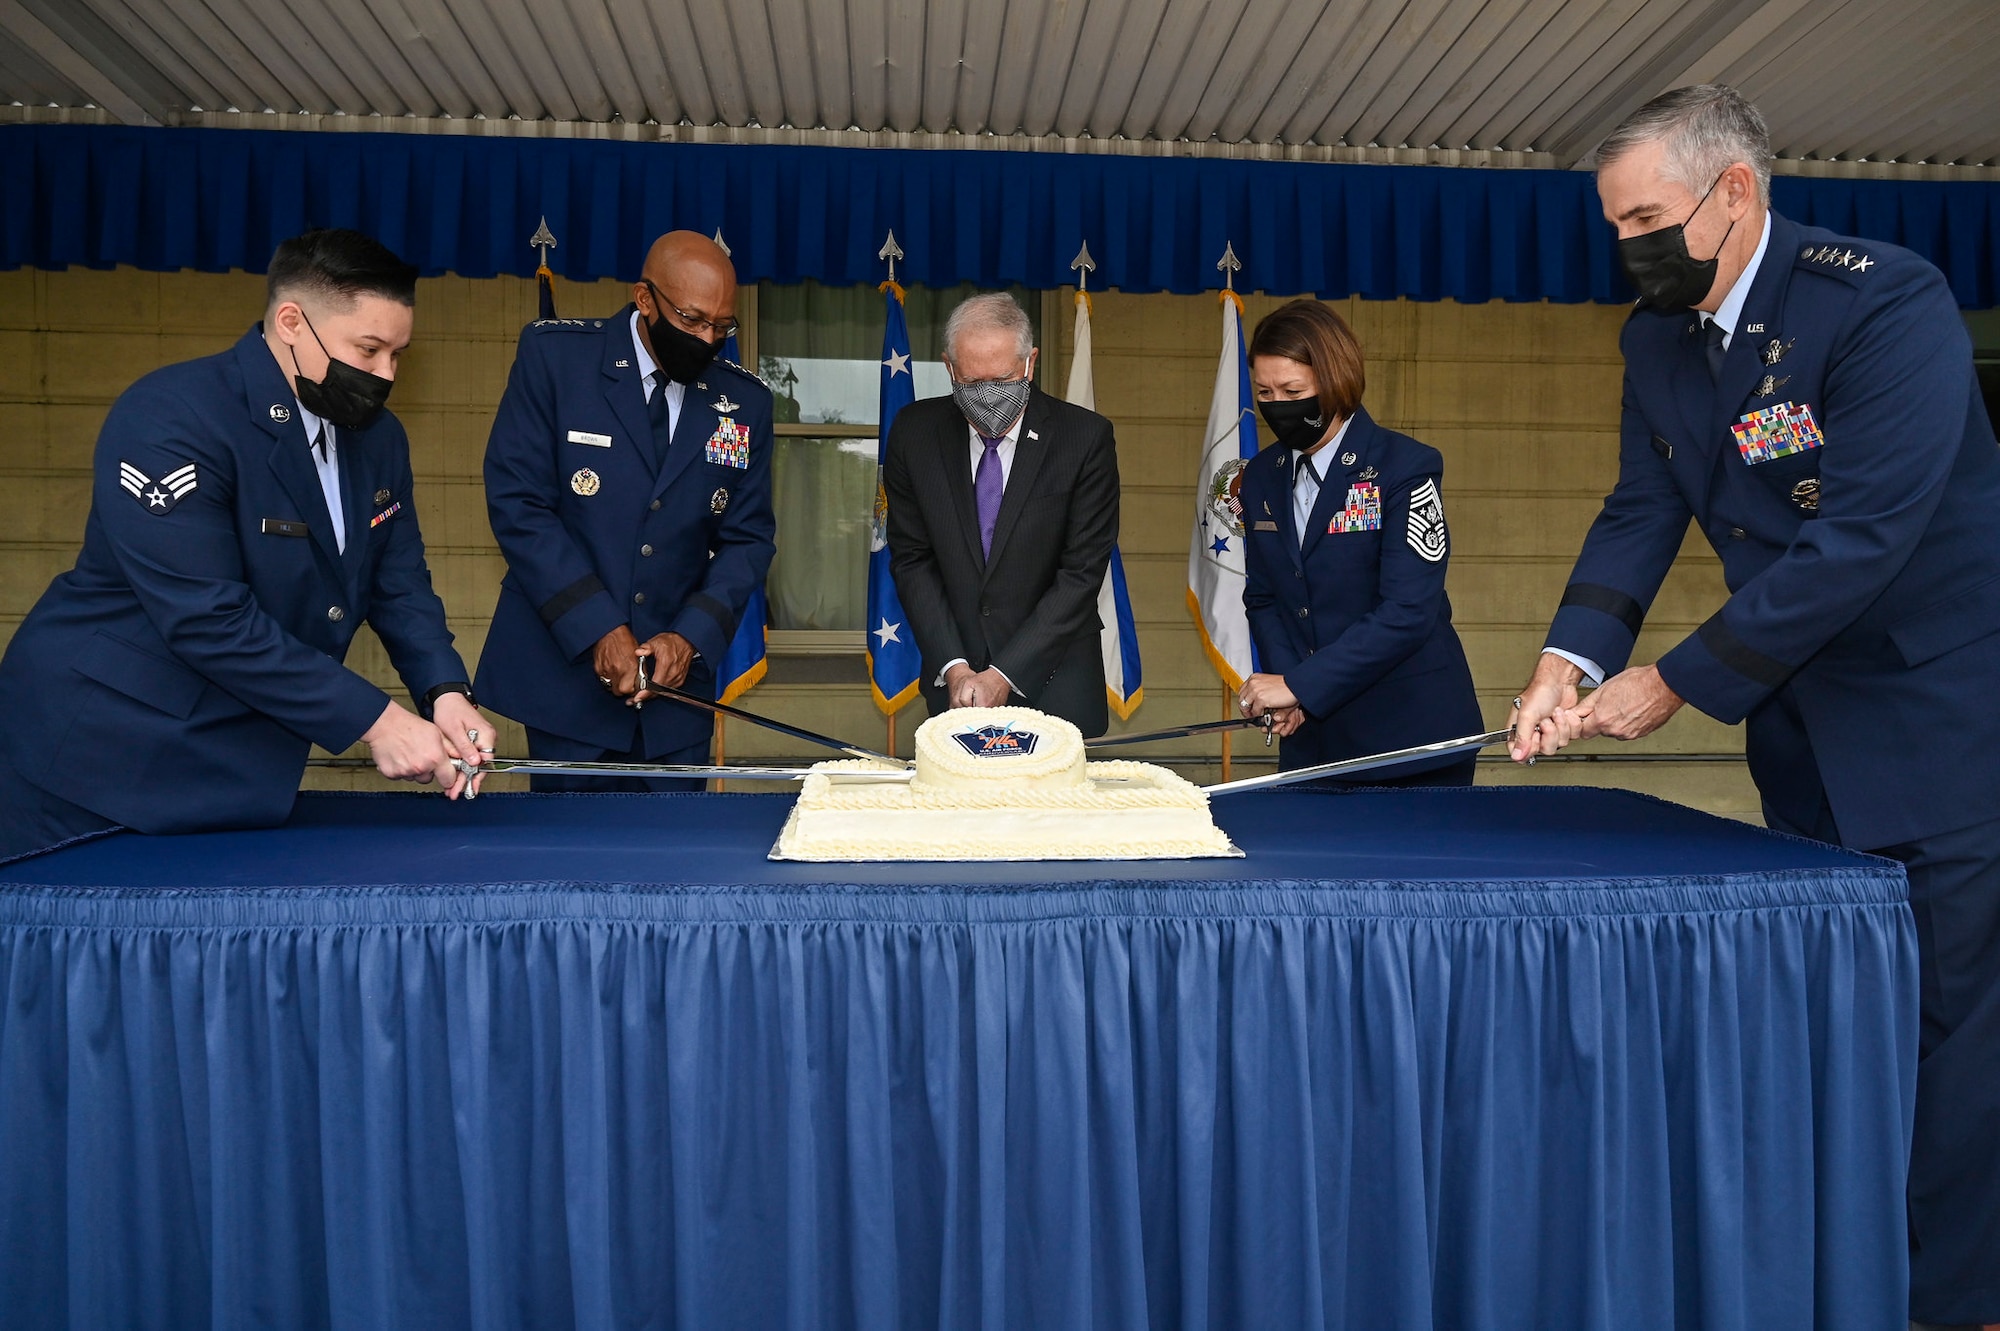 Senior Airman Alexis Hill, left, the youngest Airman present, Air Force Chief of Staff Gen. CQ Brown Jr., Secretary of the Air Force Frank Kendall, Chief Master Sgt. of the Air Force JoAnne S. Bass and Gen. John E. Hyten, vice chairman of the Joint Chiefs of Staff, cut the cake during the Air Force’s 74th birthday celebration at the Pentagon in Arlington, Va., Sept. 17, 2021. (U.S. Air Force photo by Eric Dietrich)